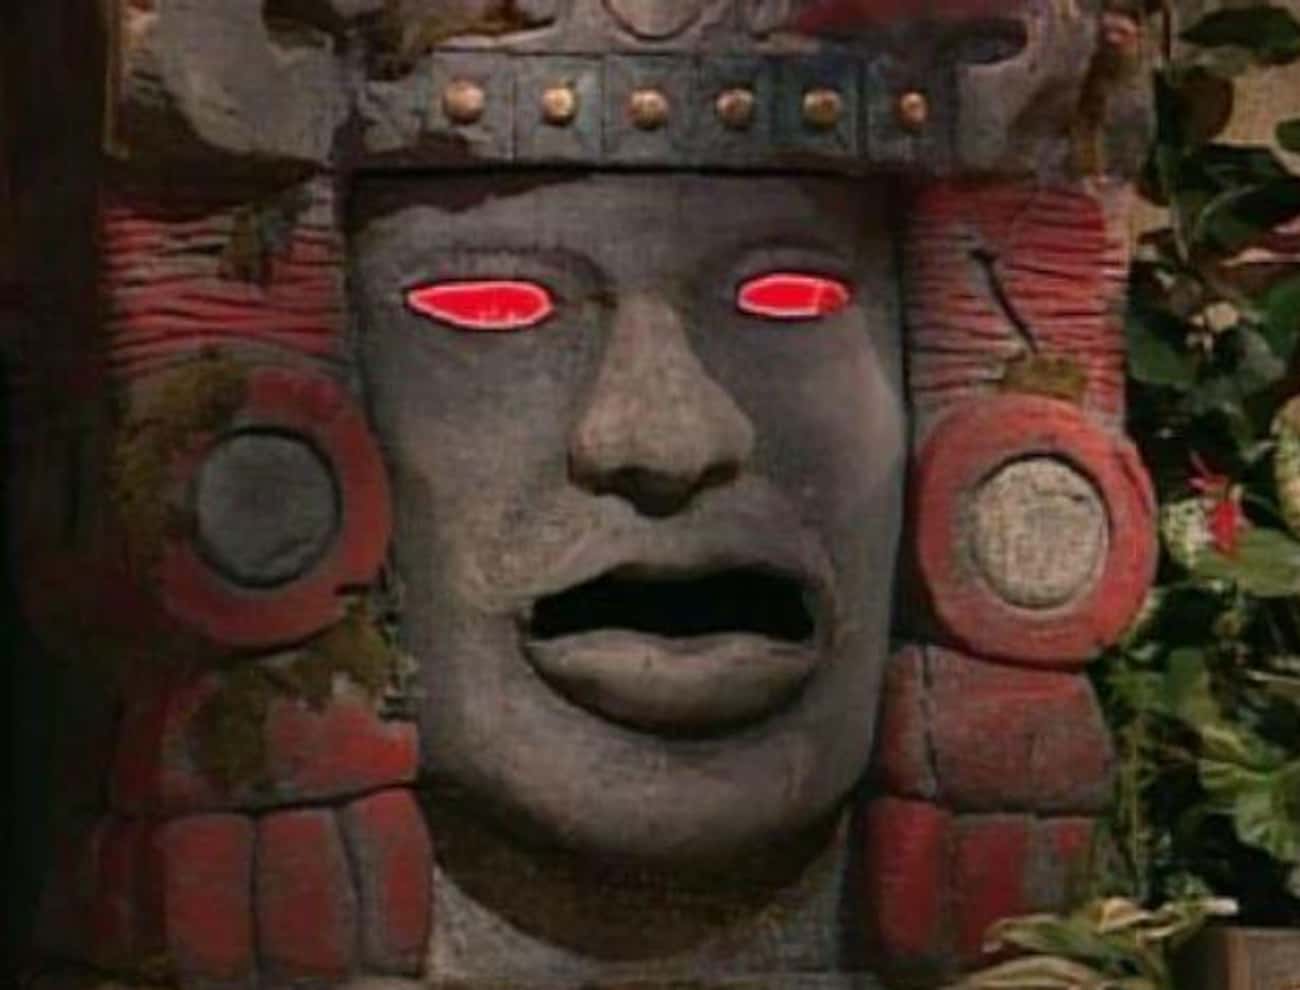 Olmec (That Giant, Talking Head) Was Actually Played By A Live Actor